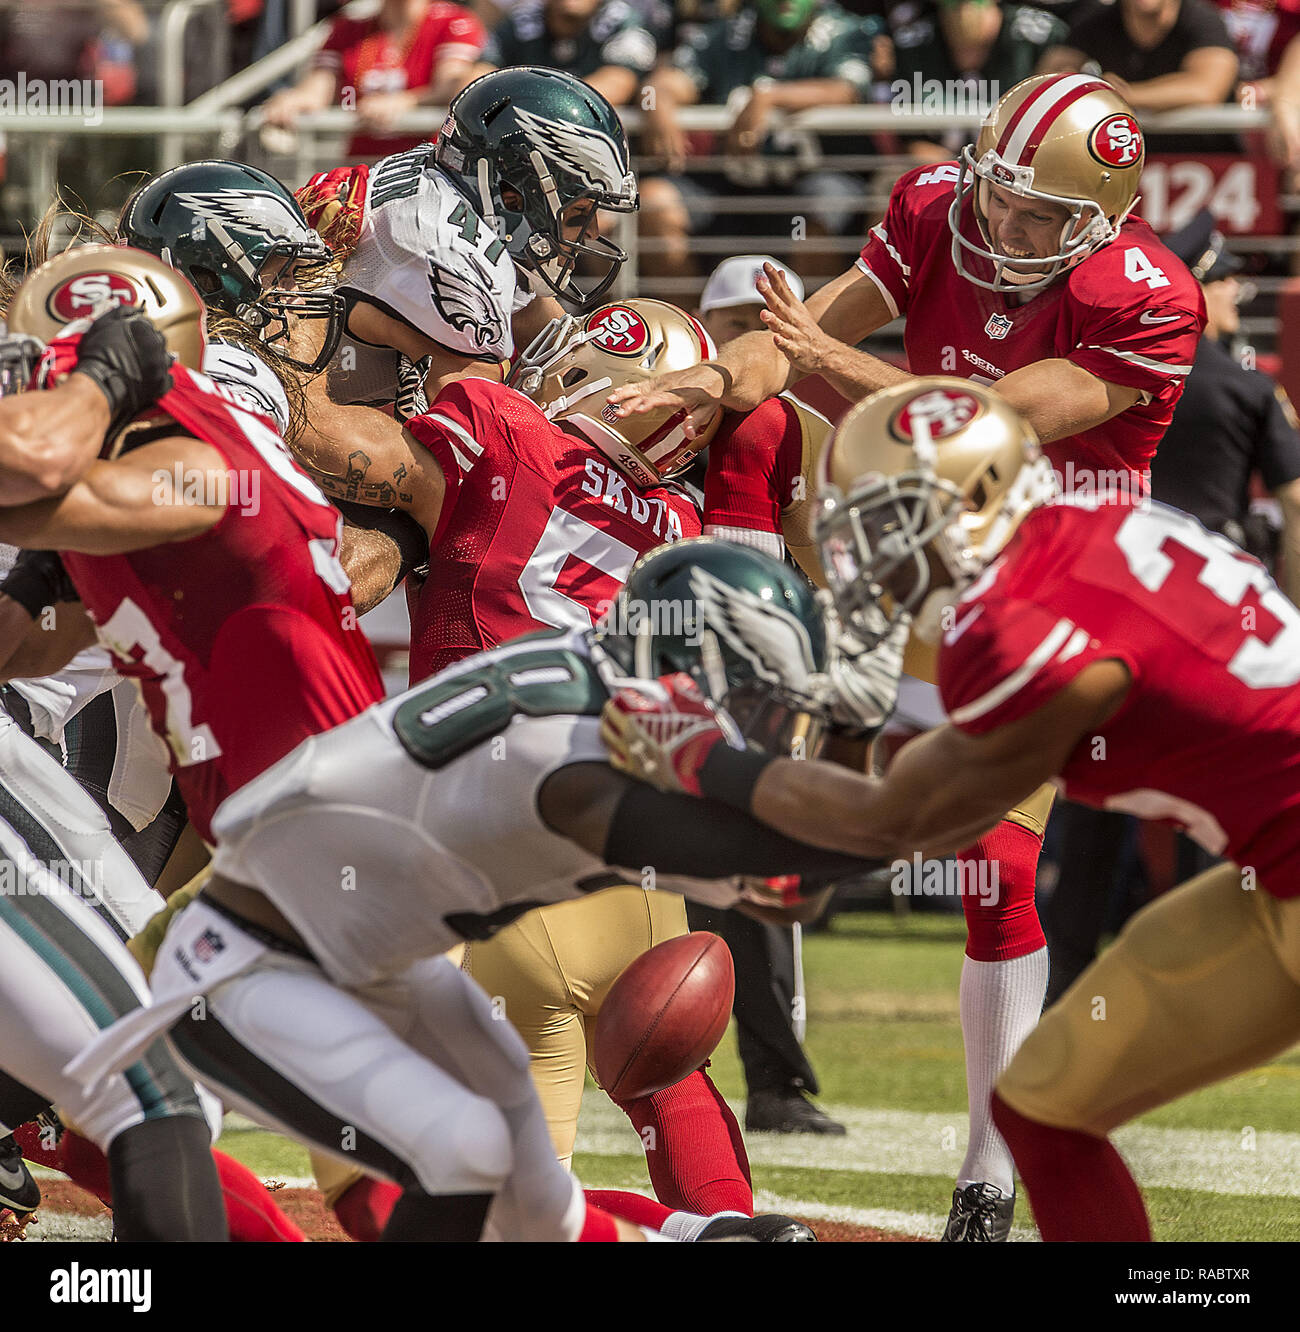 Santa Clara, California, USA. 28th Sep, 2014. San Francisco 49ers punter Andy Lee (4) get caught while his punt was blocked in the first quarter on Sunday, September 28, 2014 in Santa Clara, California. The 49ers defeated the Eagles 26-21. Credit: Al Golub/ZUMA Wire/Alamy Live News Stock Photo